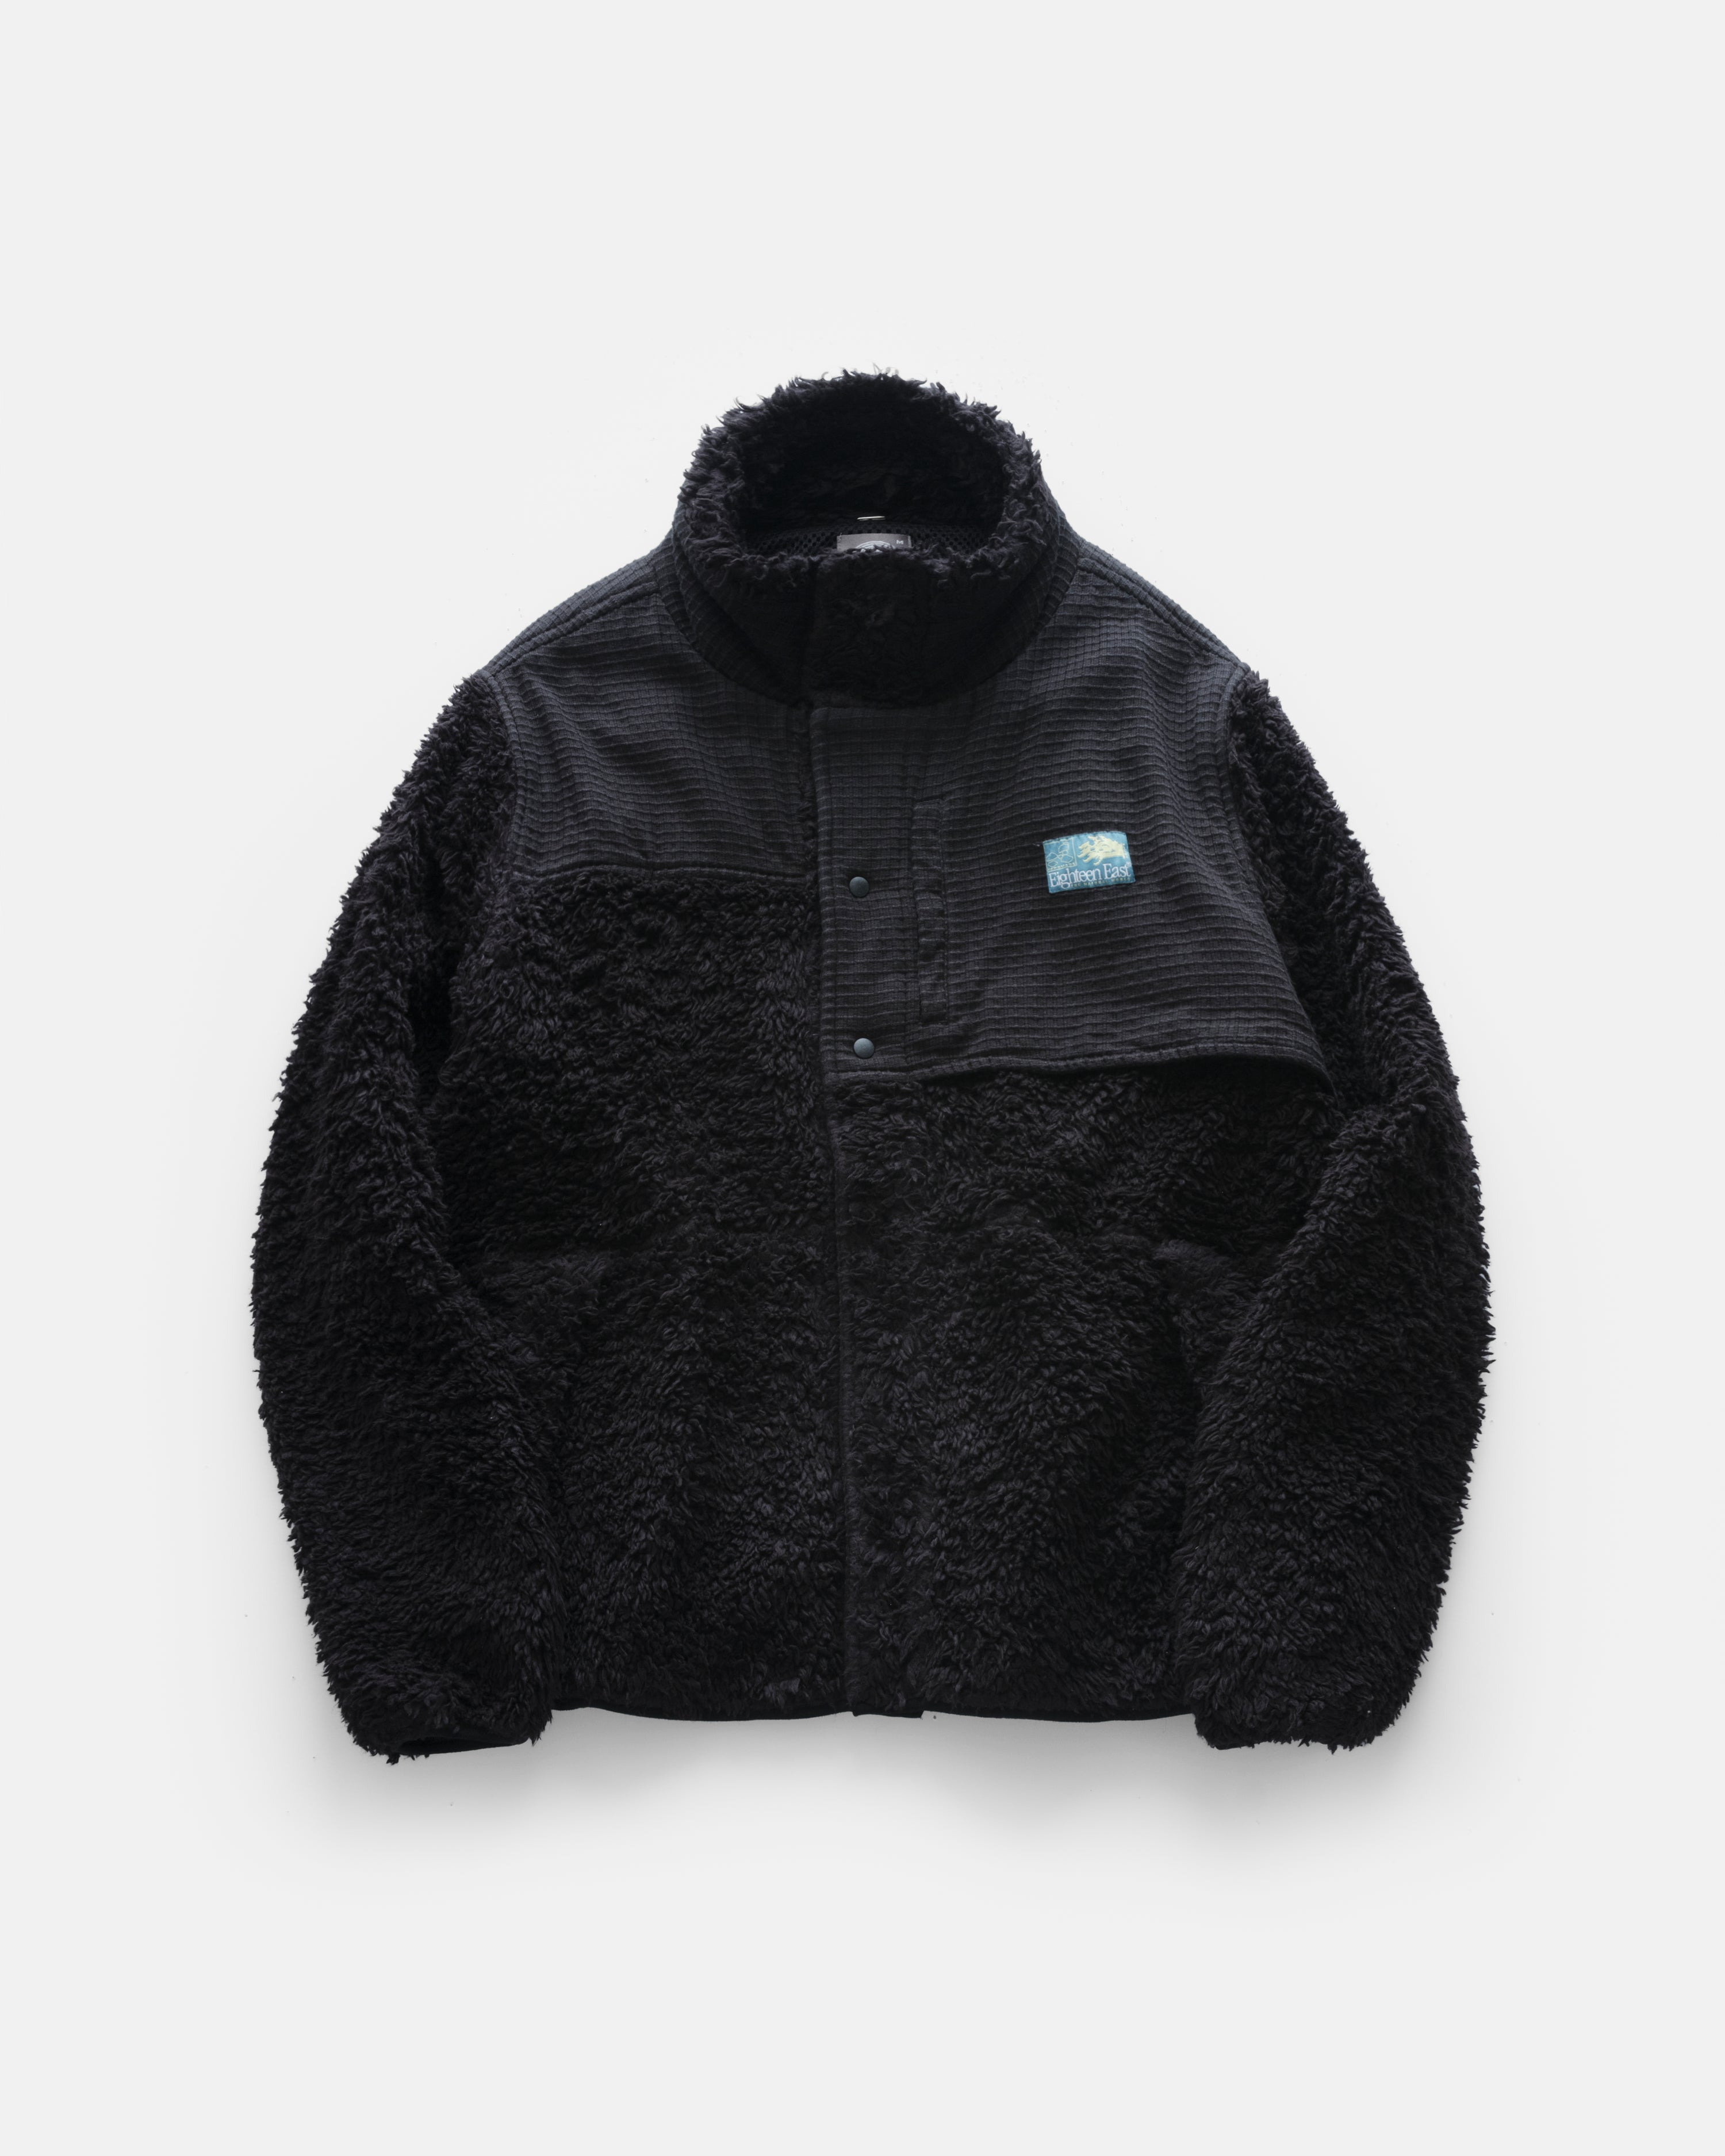 LOOP RD SNAP FRONT JACKET - BLACK DEEP PILE ORGANIC COTTON FLEECE /  EXPLODED RIPSTOP COTTON